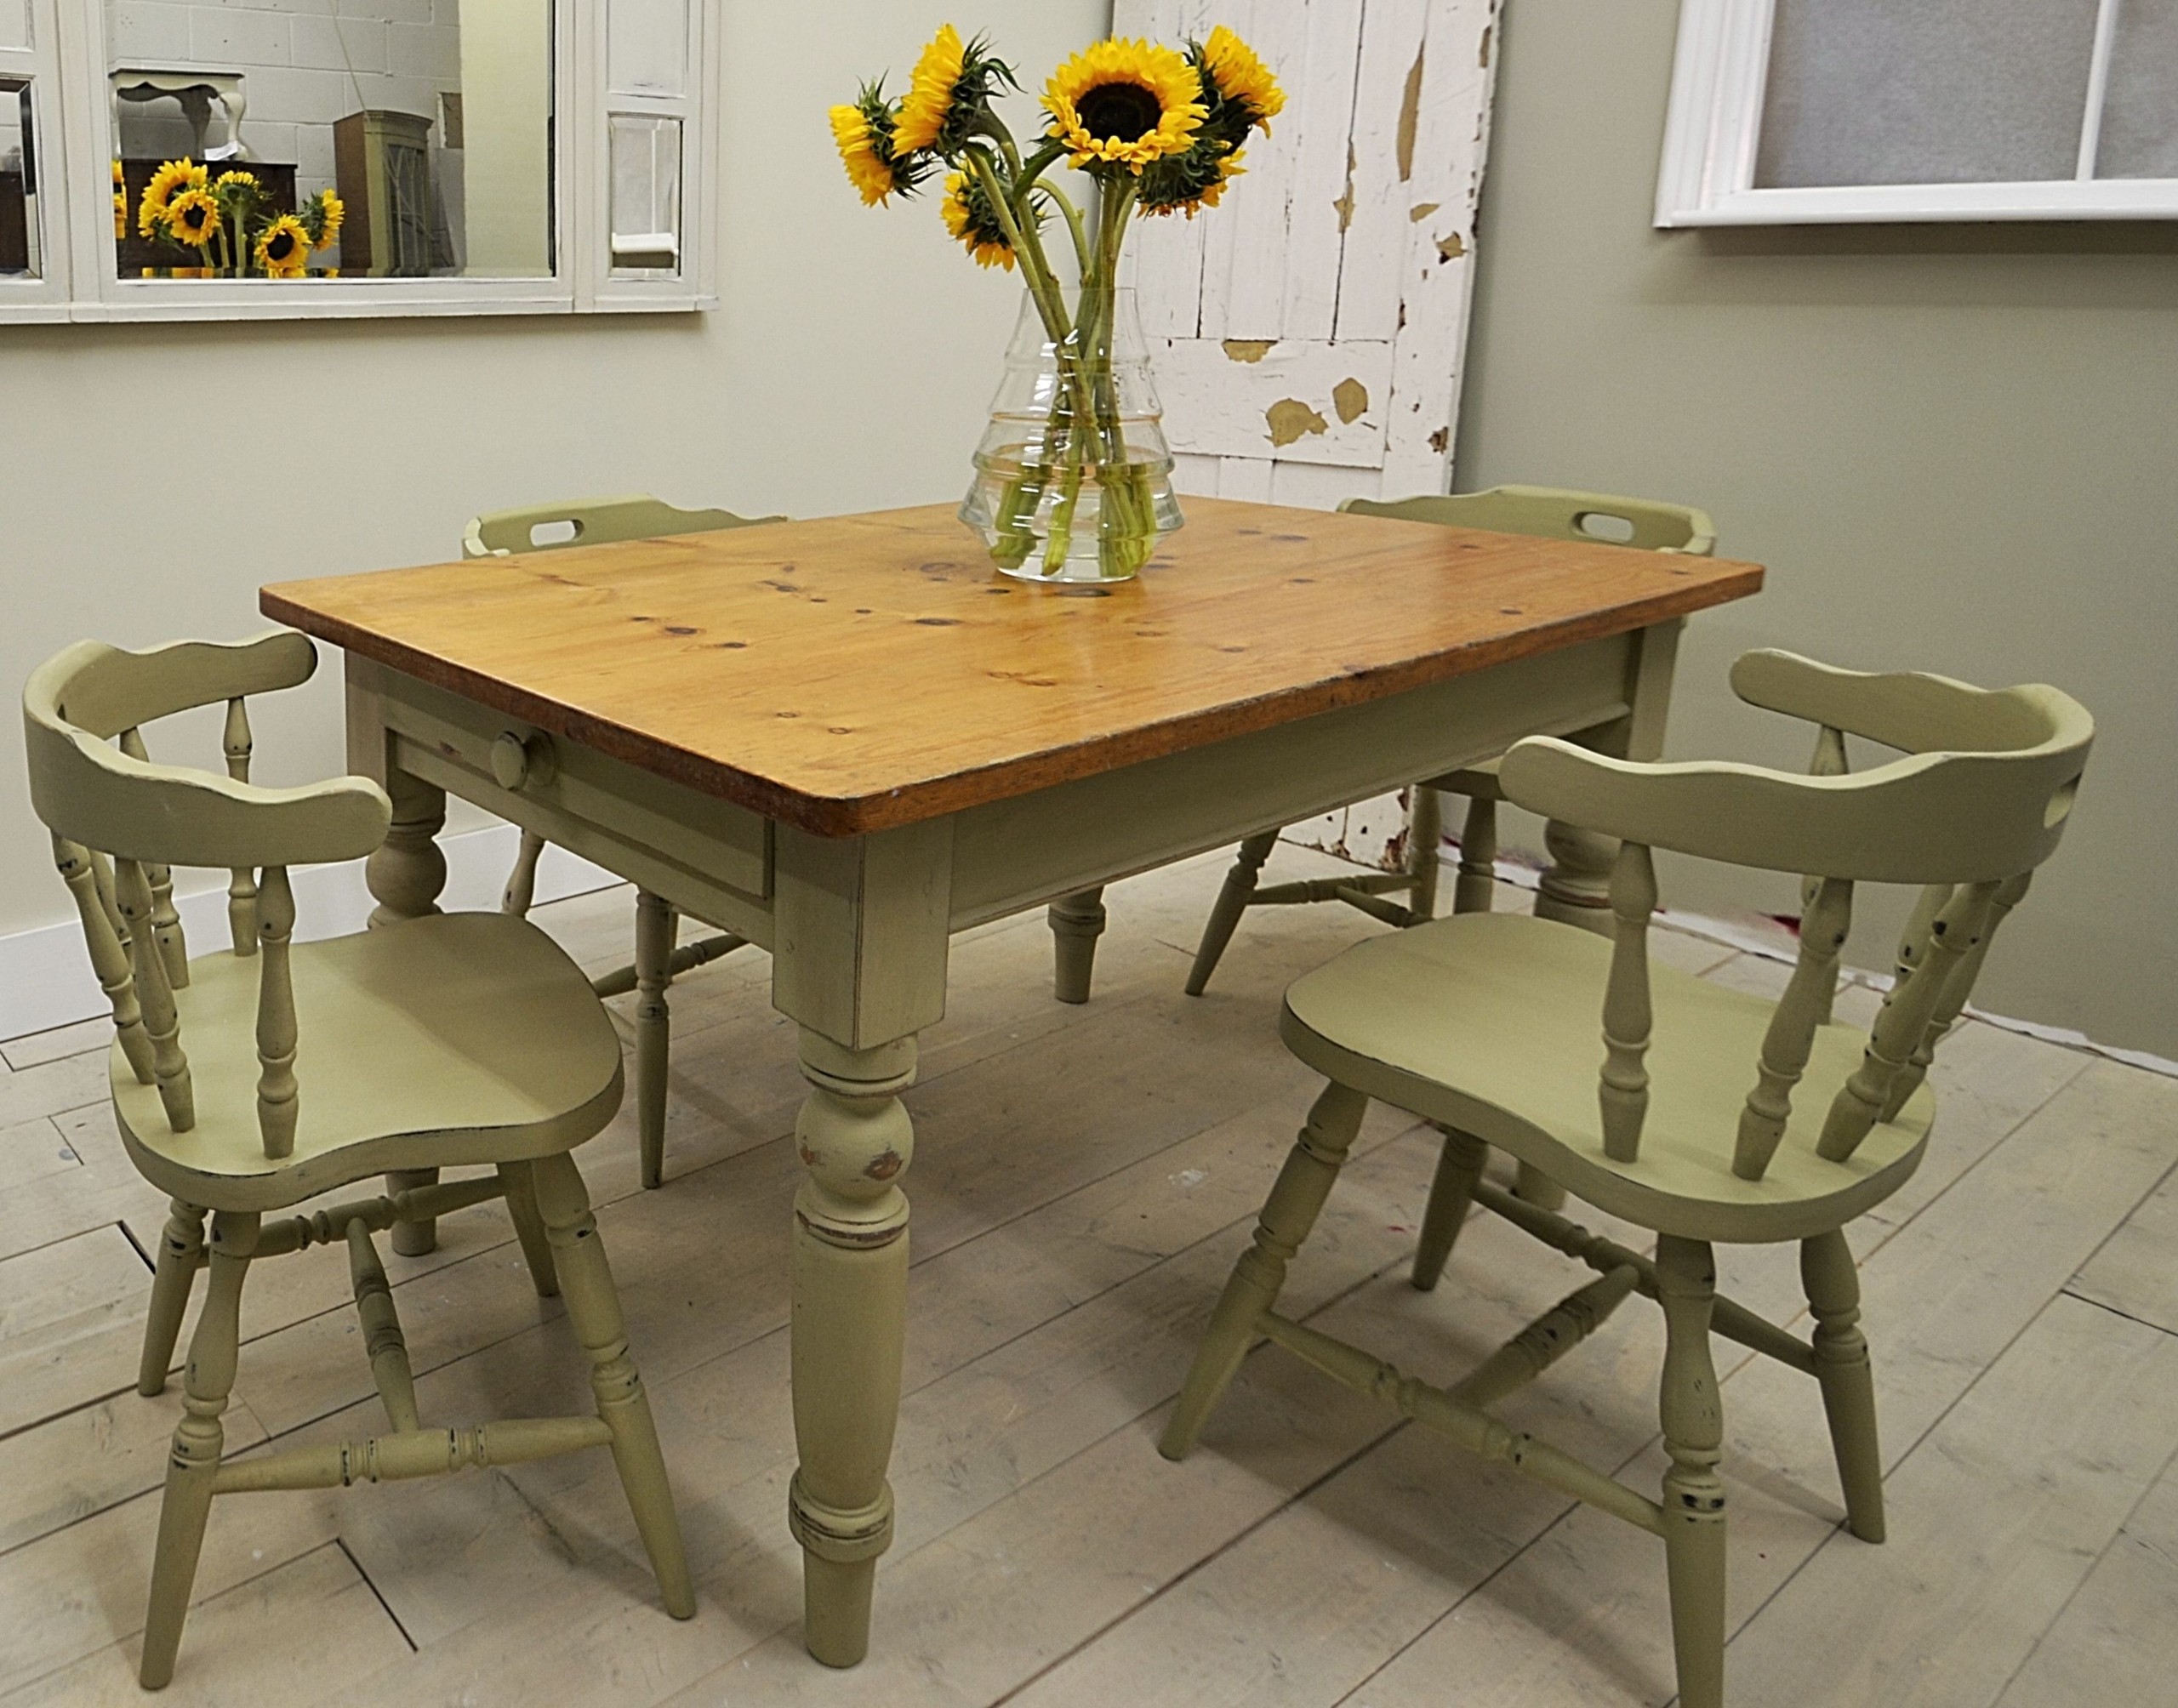 Shabby chic farmhouse dining table with